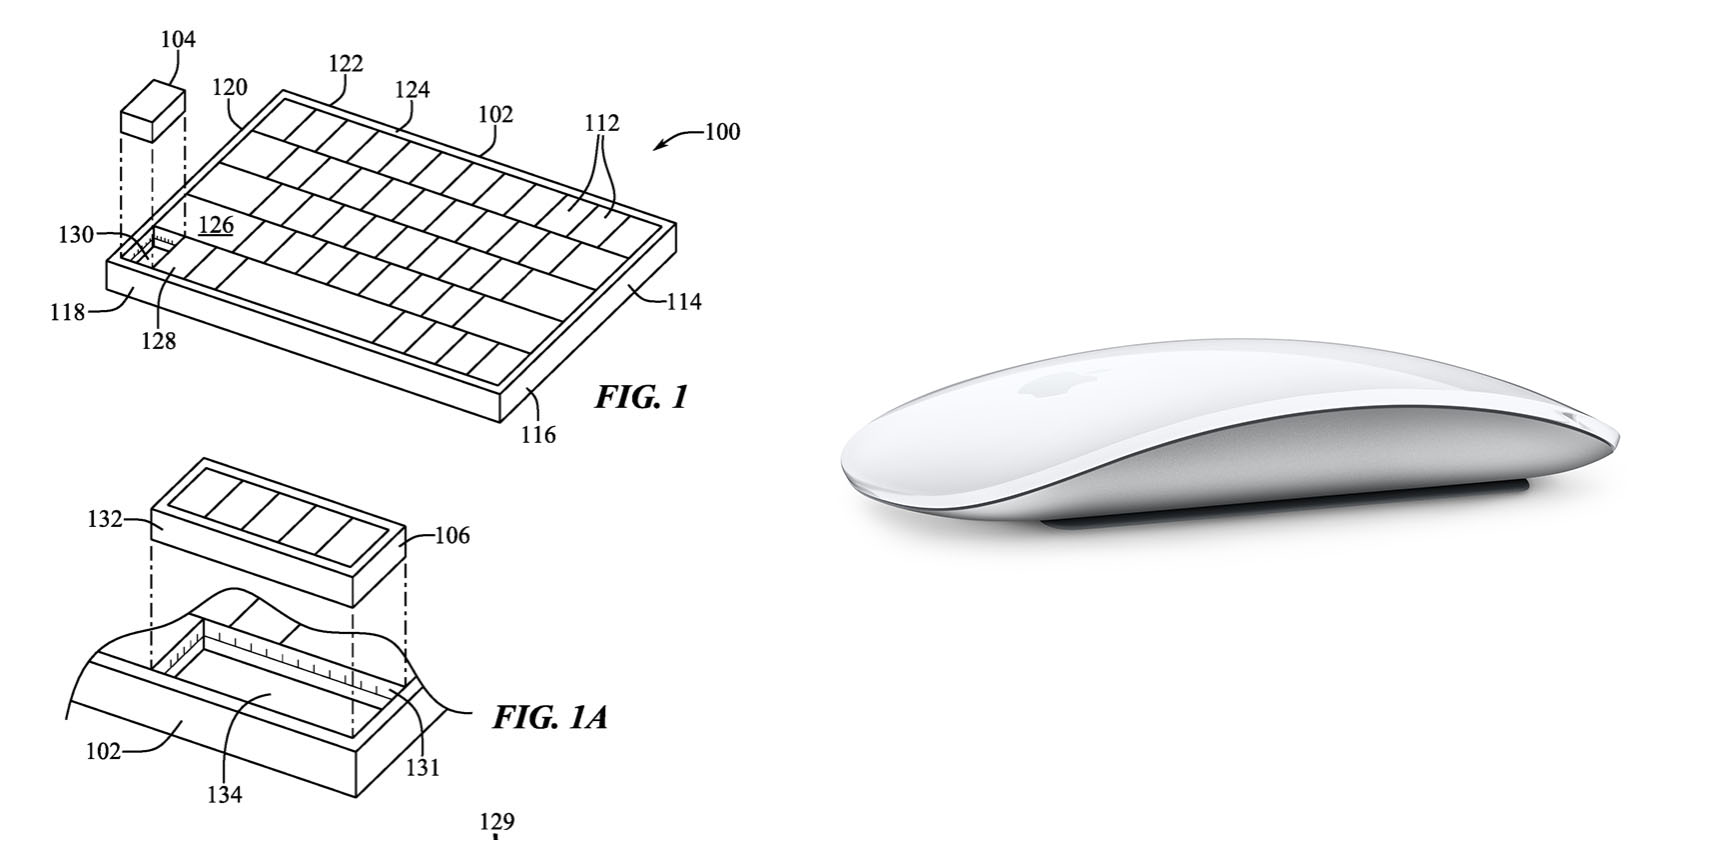 Removable MacBook keys could act as a mouse – Apple patent - 9to5Mac